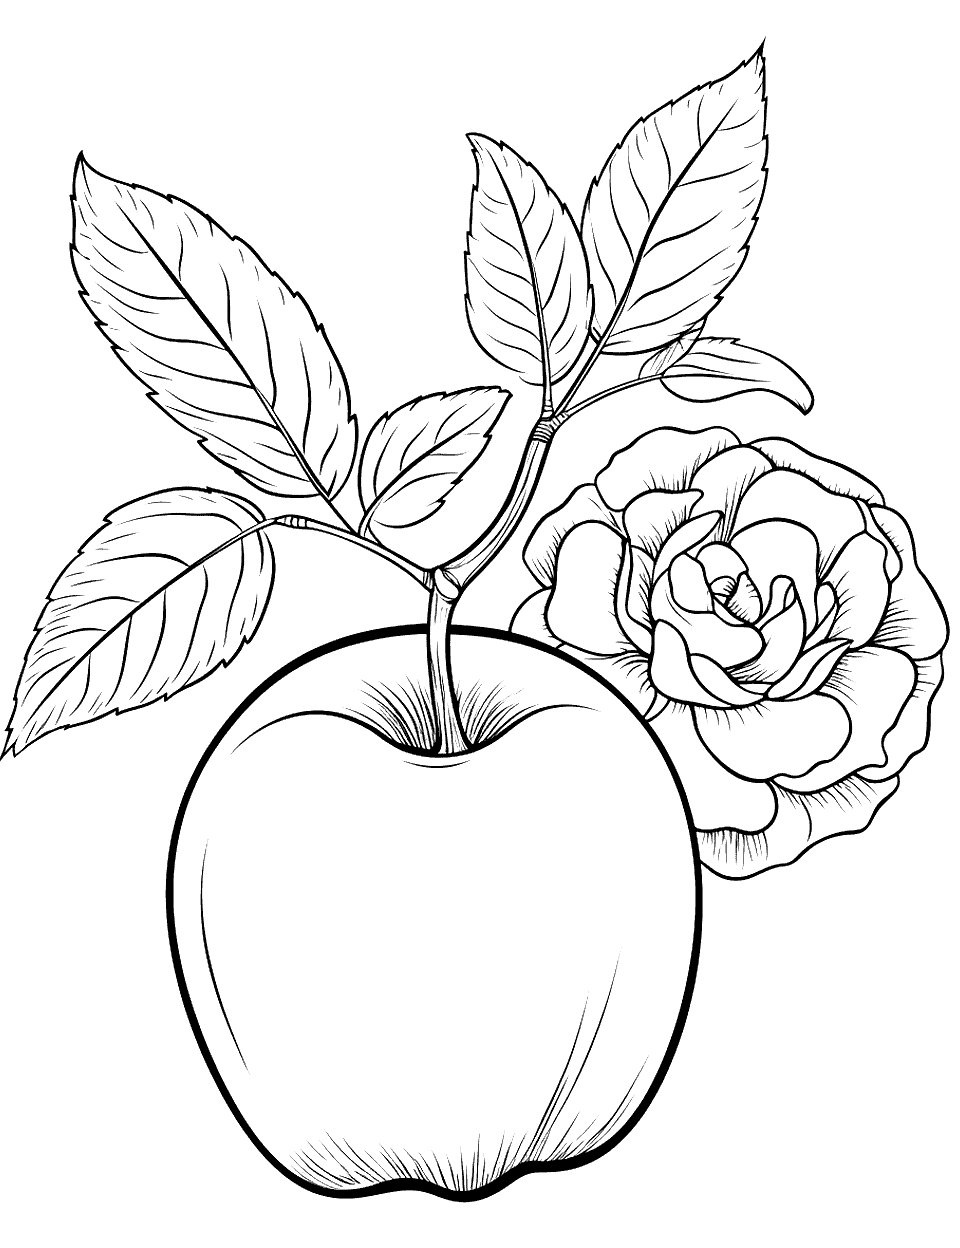 Rose and Apple Composition Coloring Page - A beautiful rose lying next to a ripe apple.